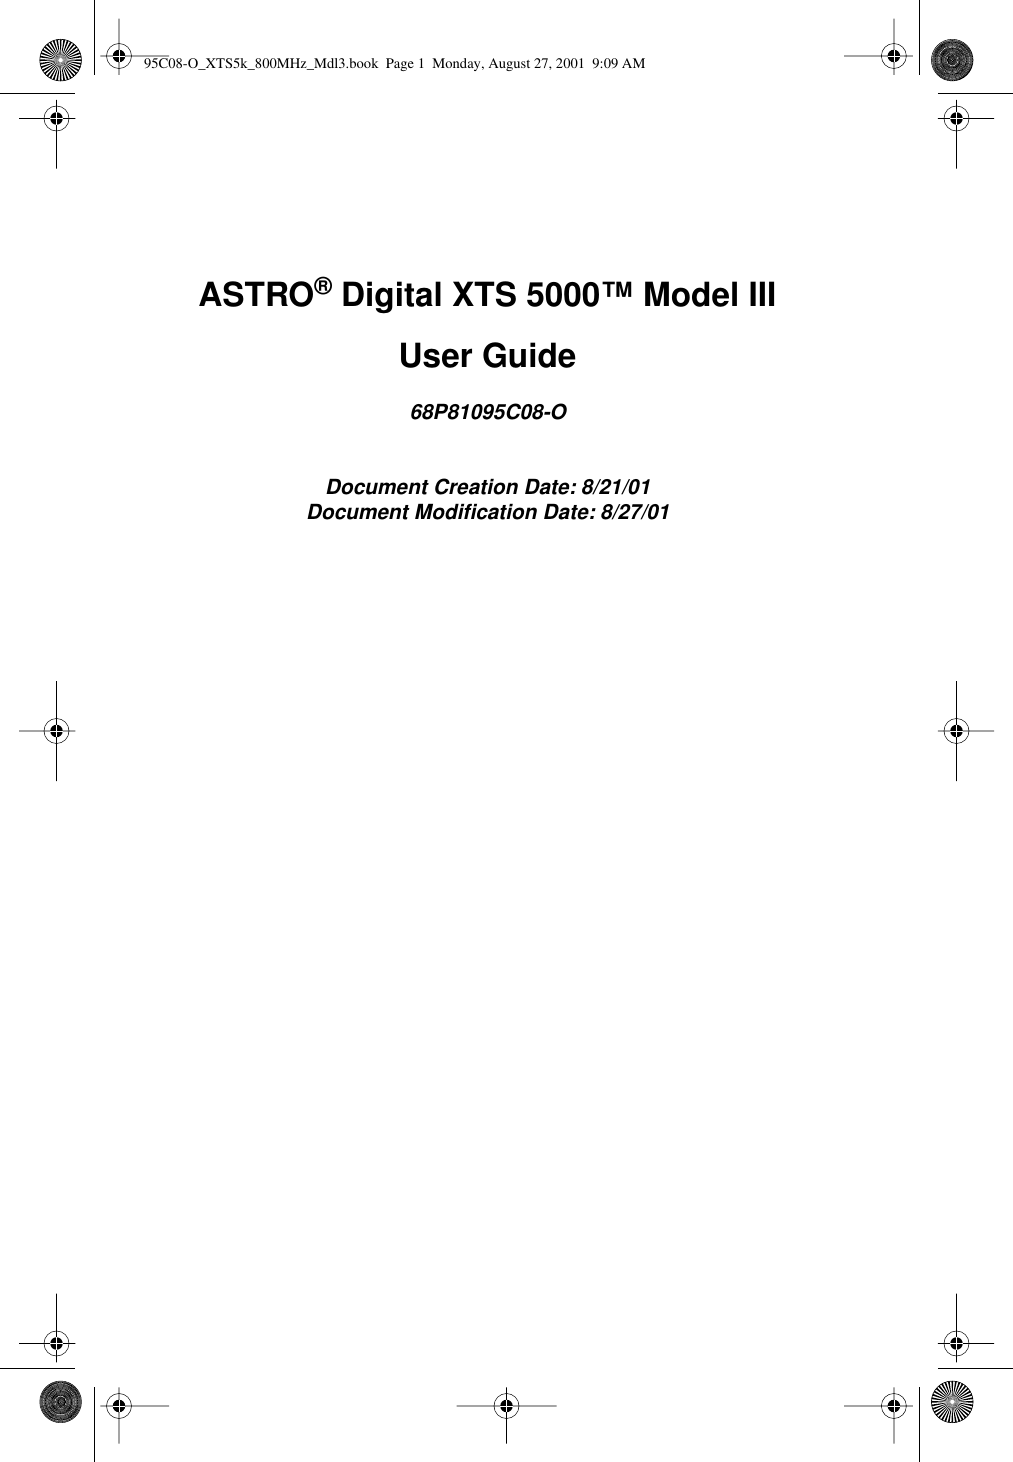  ASTRO ®  Digital XTS 5000™ Model III User Guide 68P81095C08-ODocument Creation Date: 8/21/01Document Modiﬁcation Date: 8/27/01 95C08-O_XTS5k_800MHz_Mdl3.book  Page 1  Monday, August 27, 2001  9:09 AM